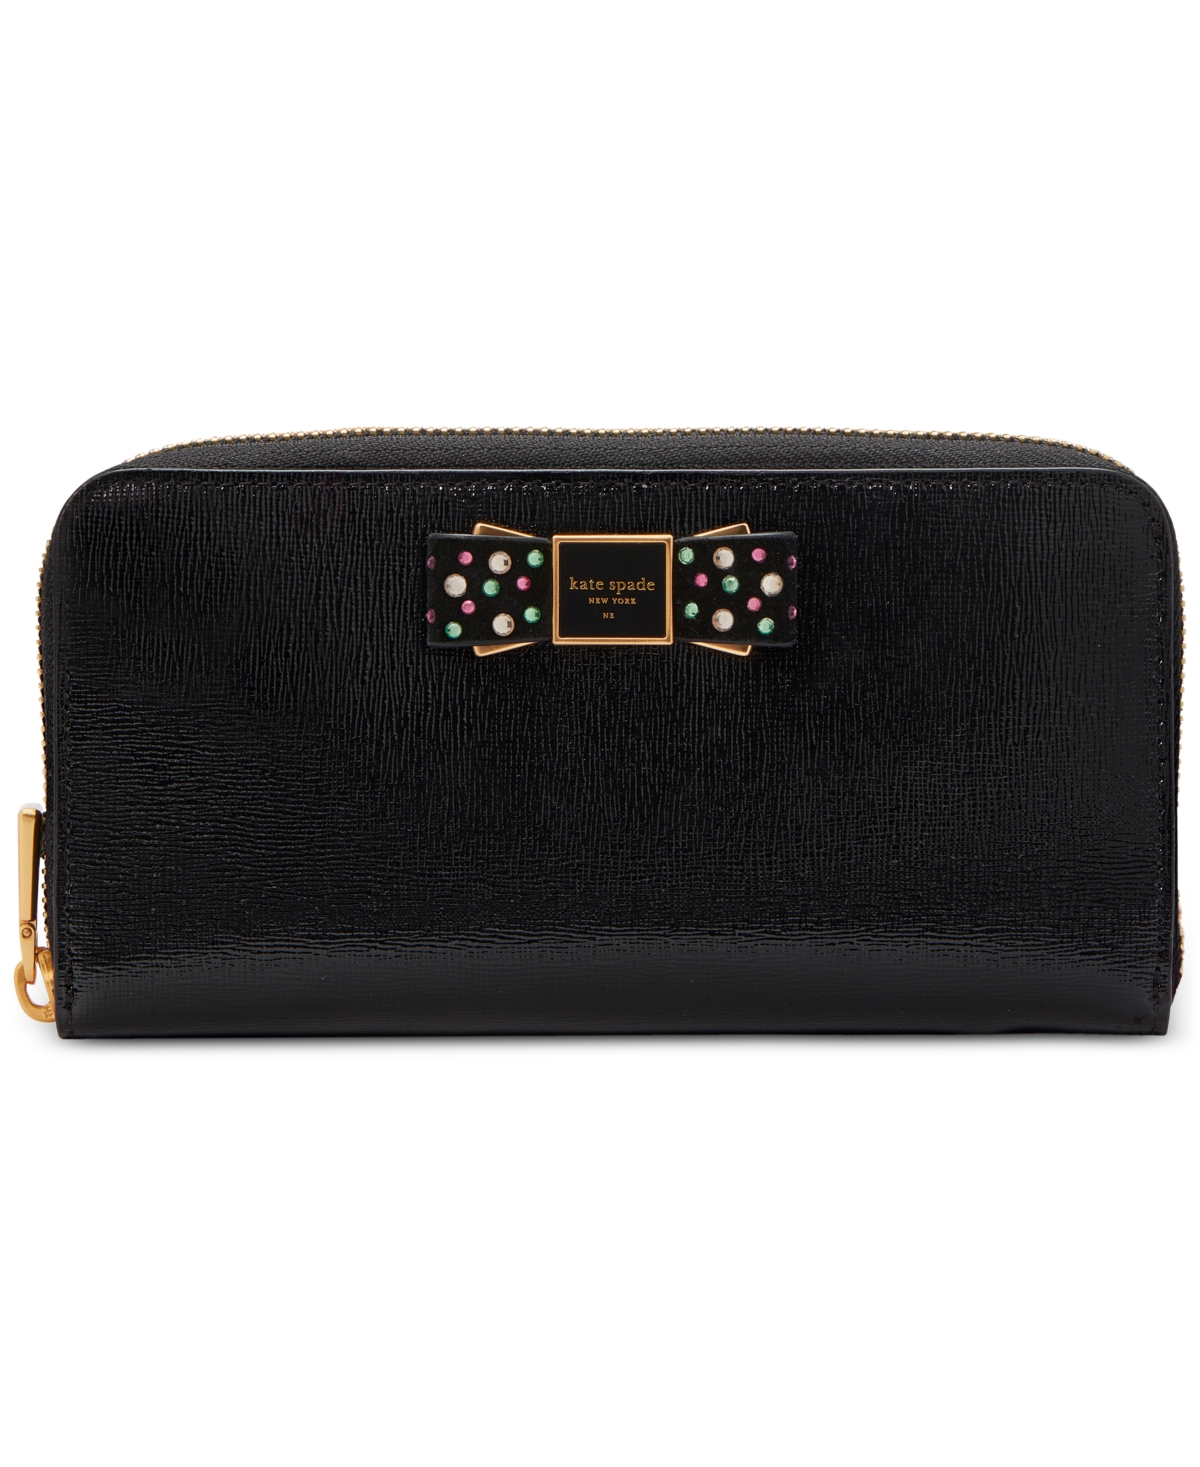 Kate Spade New York Morgan Bedazzled Bow Saffiano Leather Zip Around Continental Wallet In Black